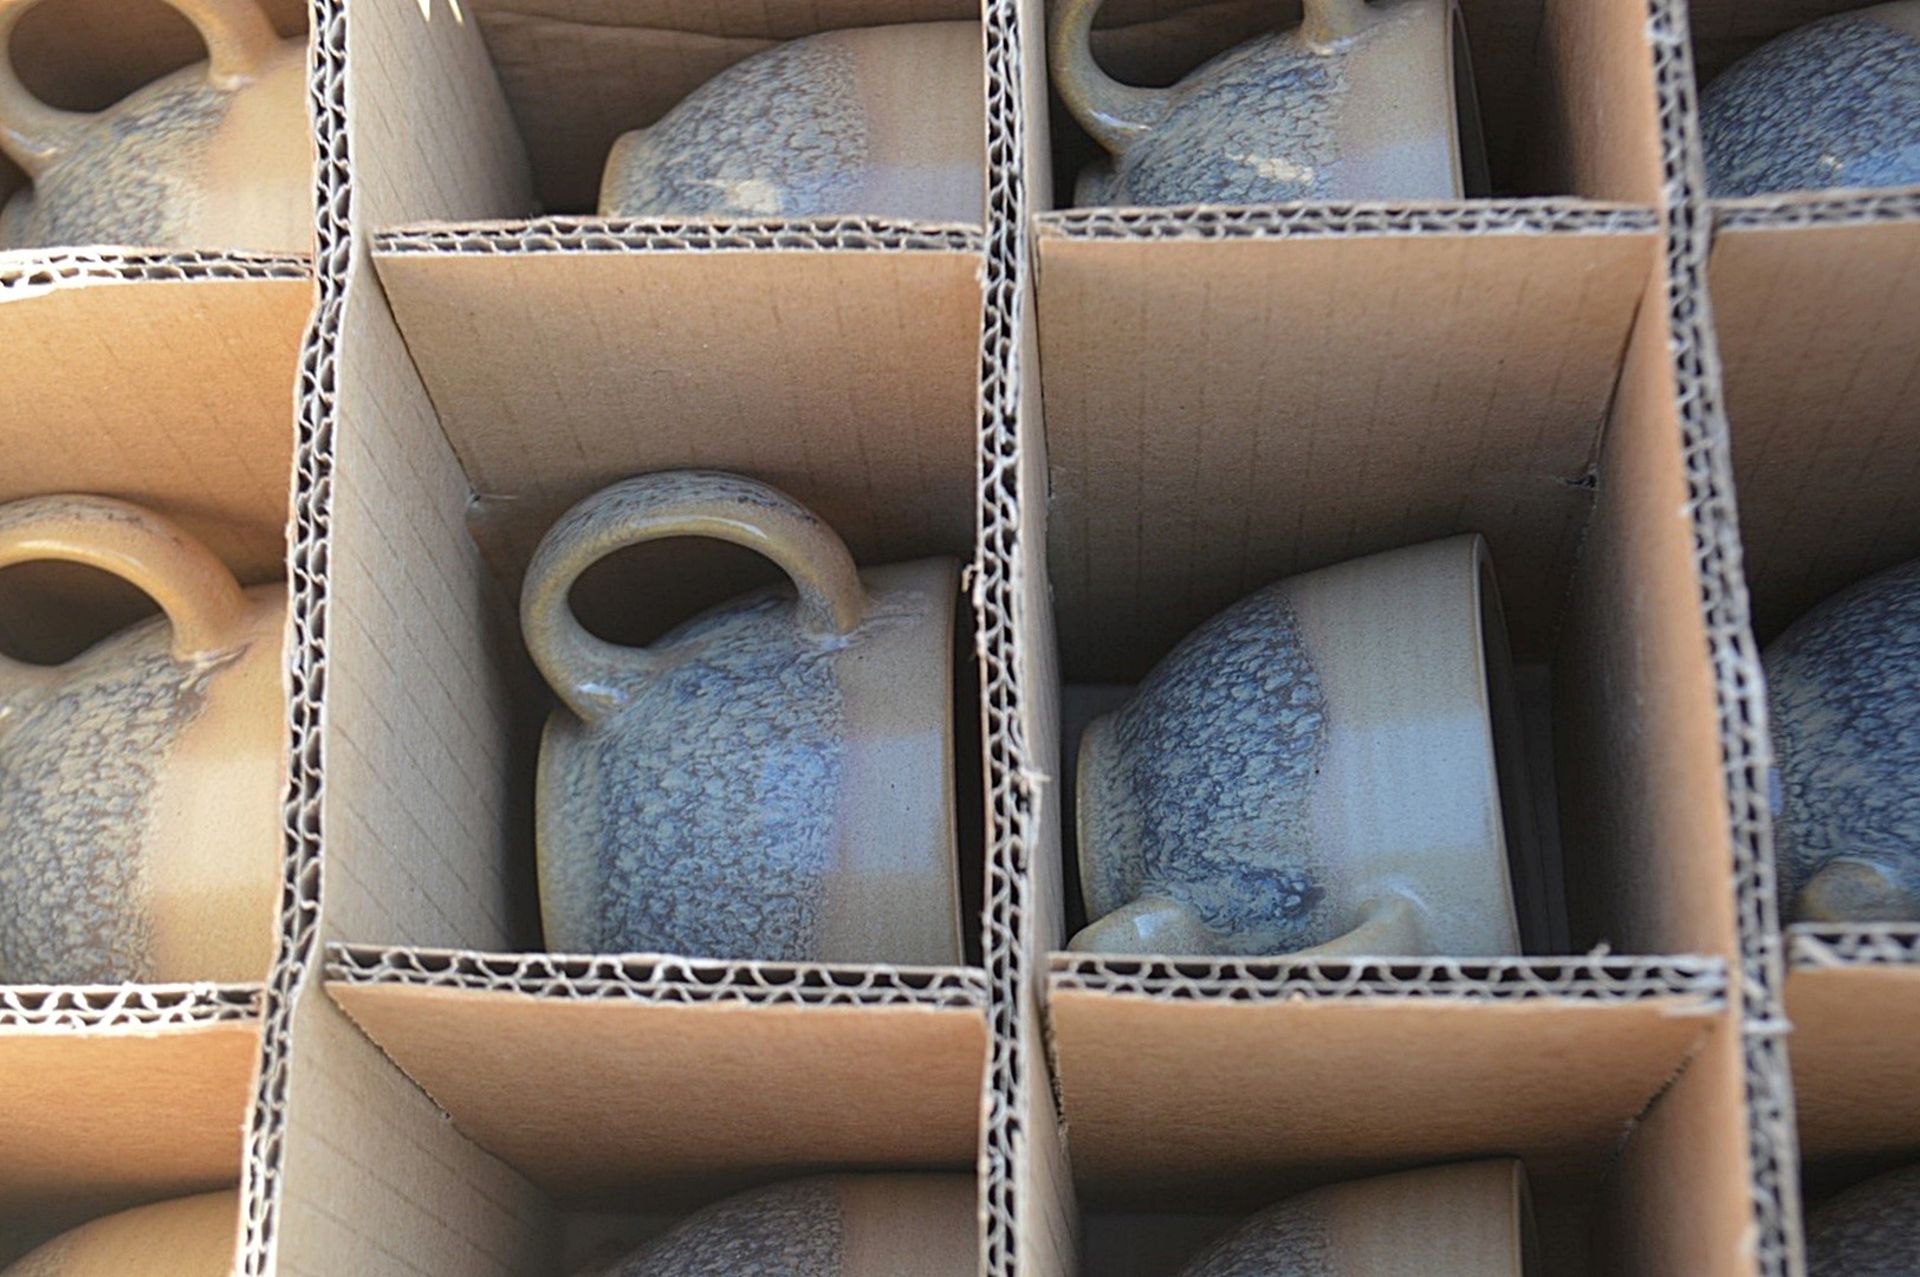 12 x DUDSON 'Evolution Granite' Vitrified Stoneware 60ml Creamer Jugs - Recently Removed From An - Image 3 of 3